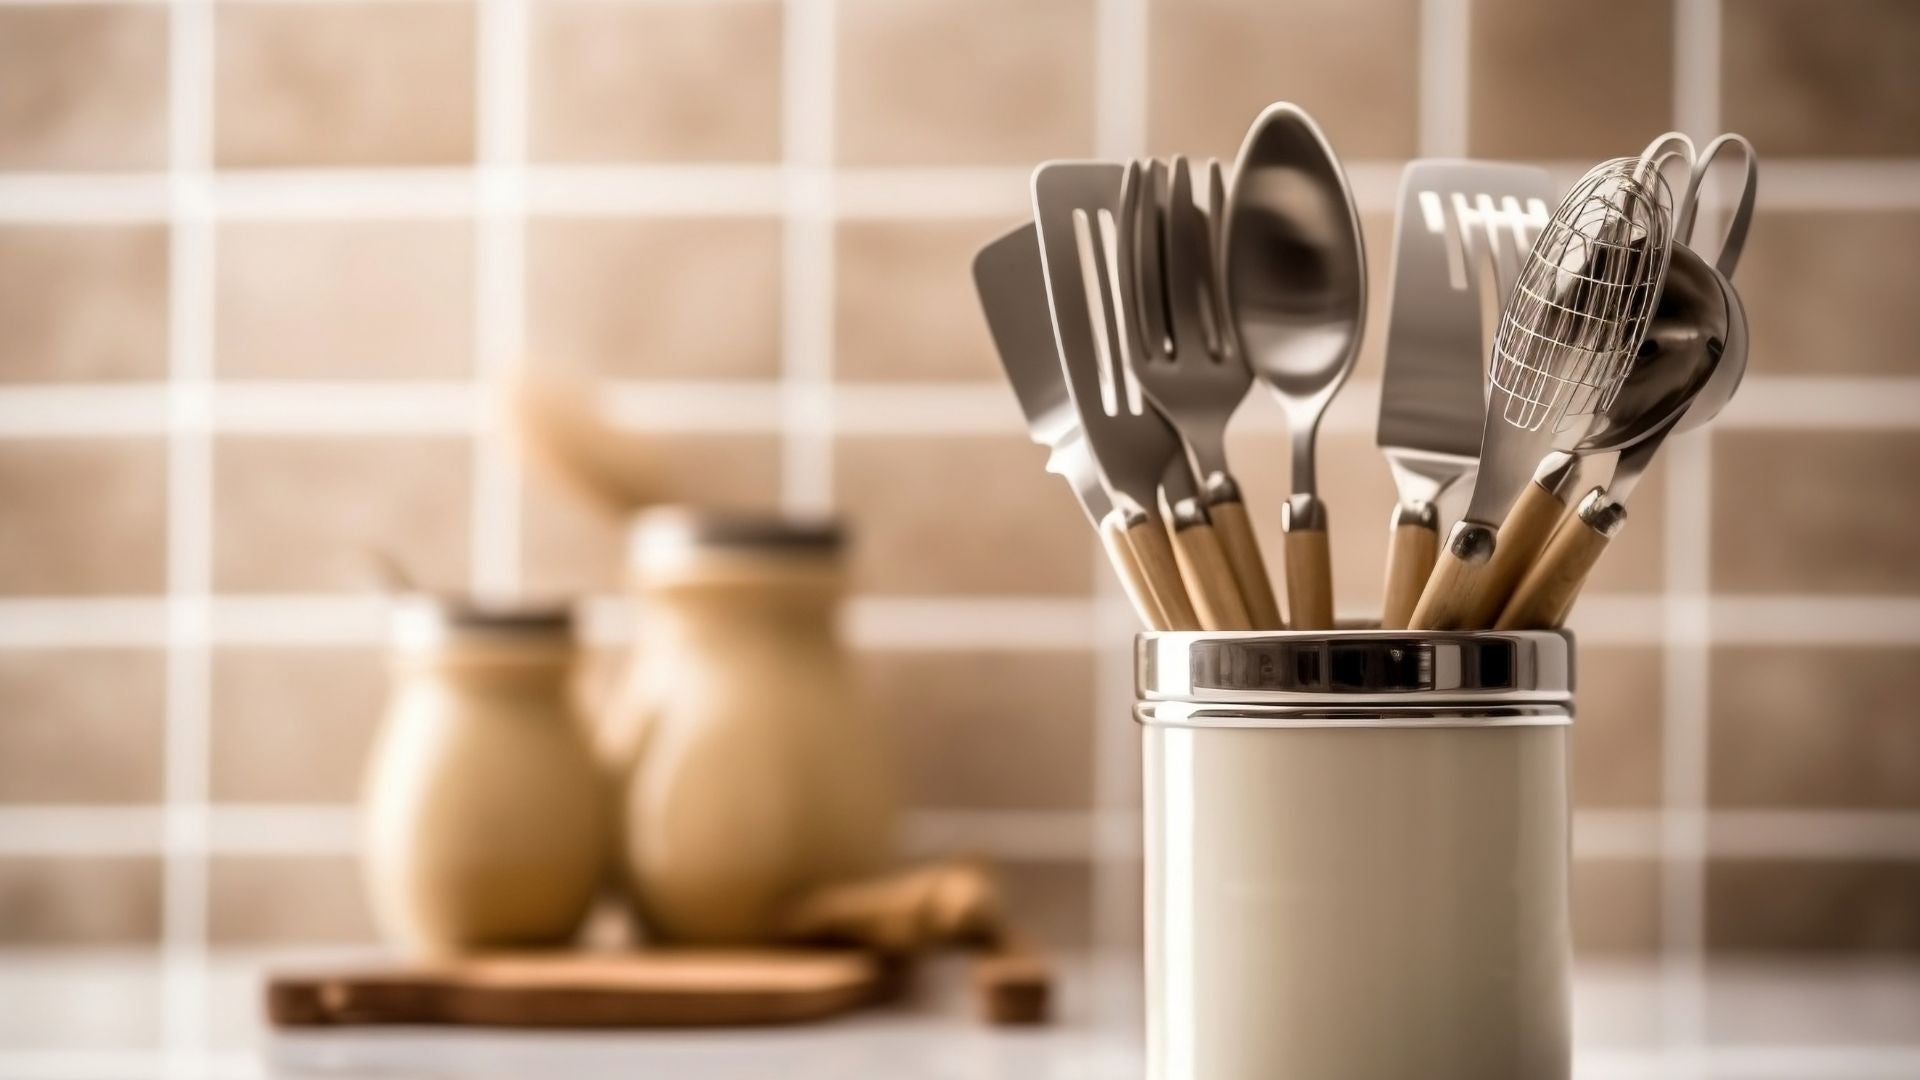 Cookware and Kitchen Gadgets as Mother’s Day gift